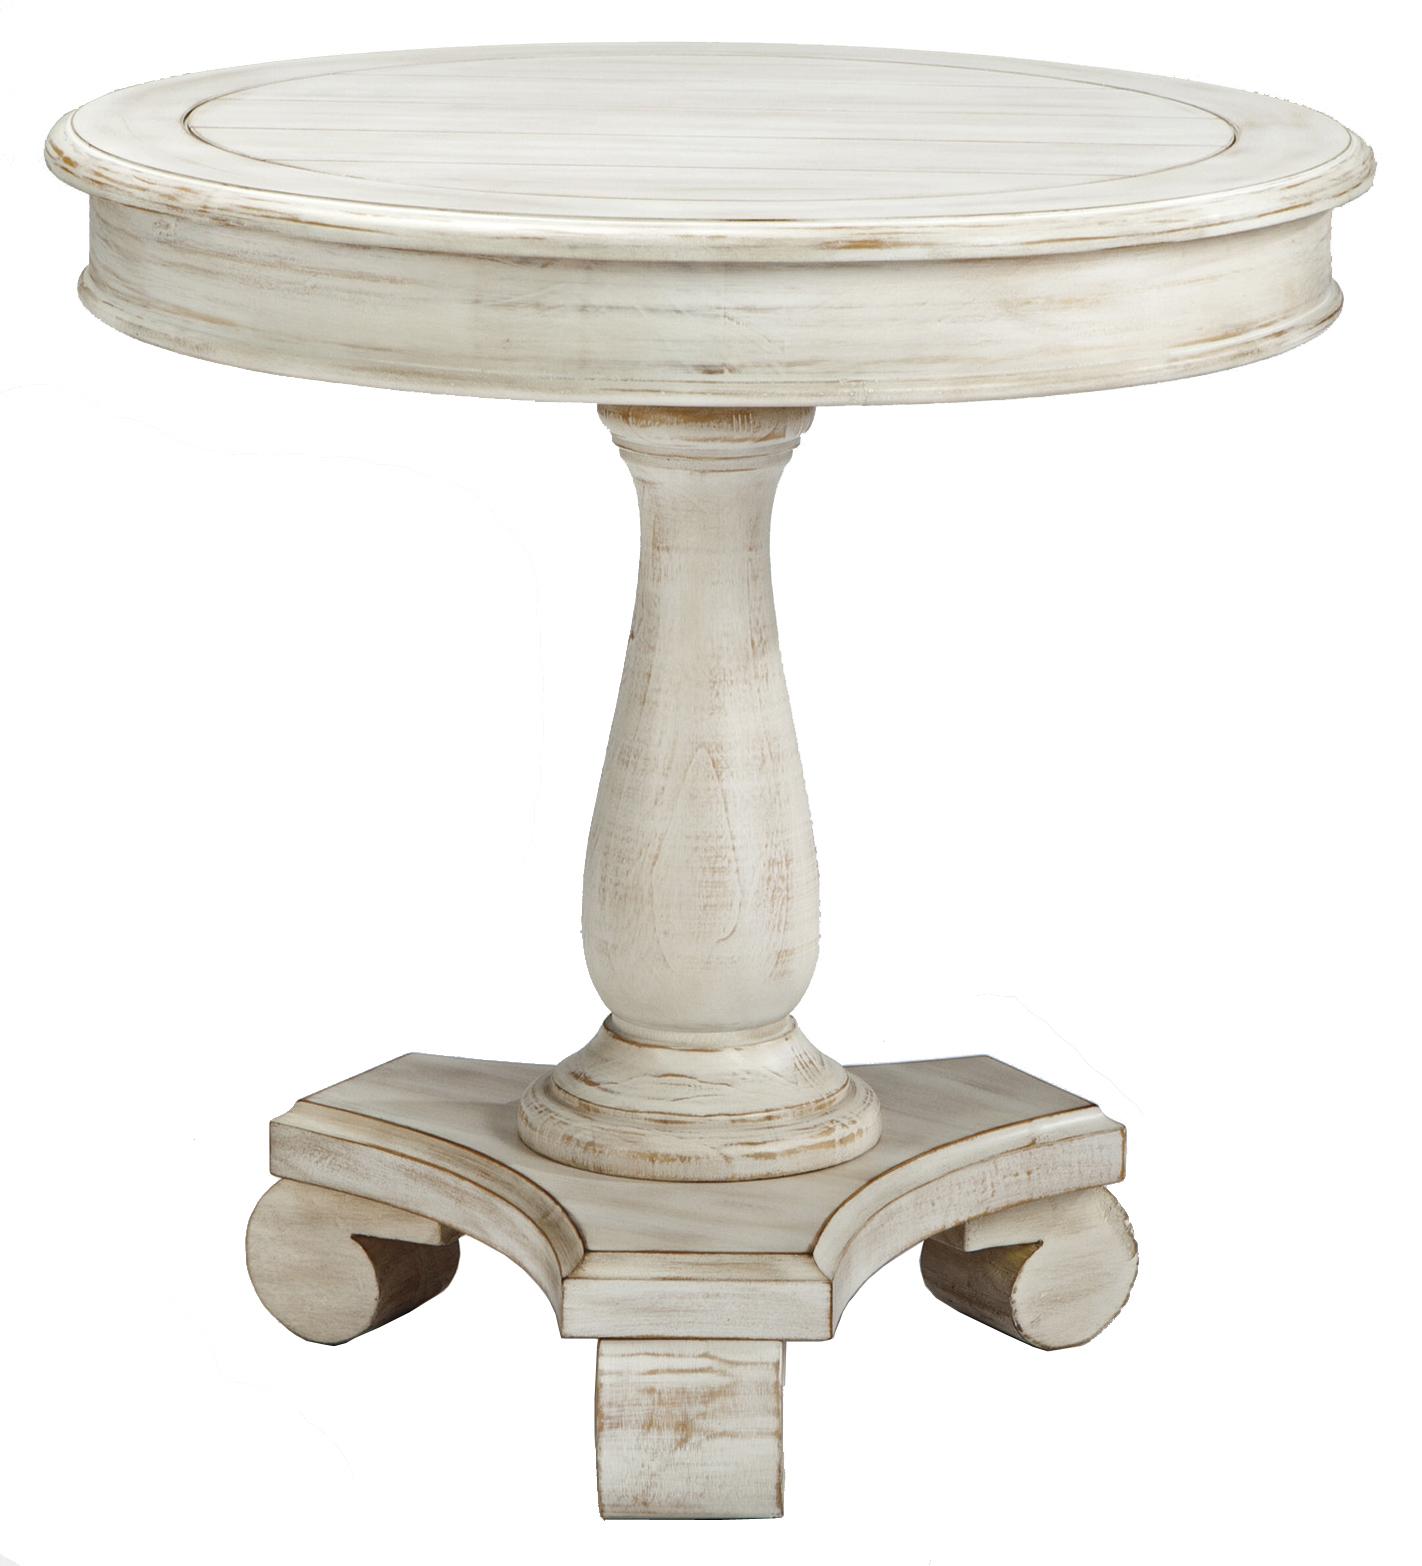 mirimyn round accent table with turned pedestal base signature design ashley wayside furniture products color cottage accents grey threshold parquet patio covers tiffany leadlight